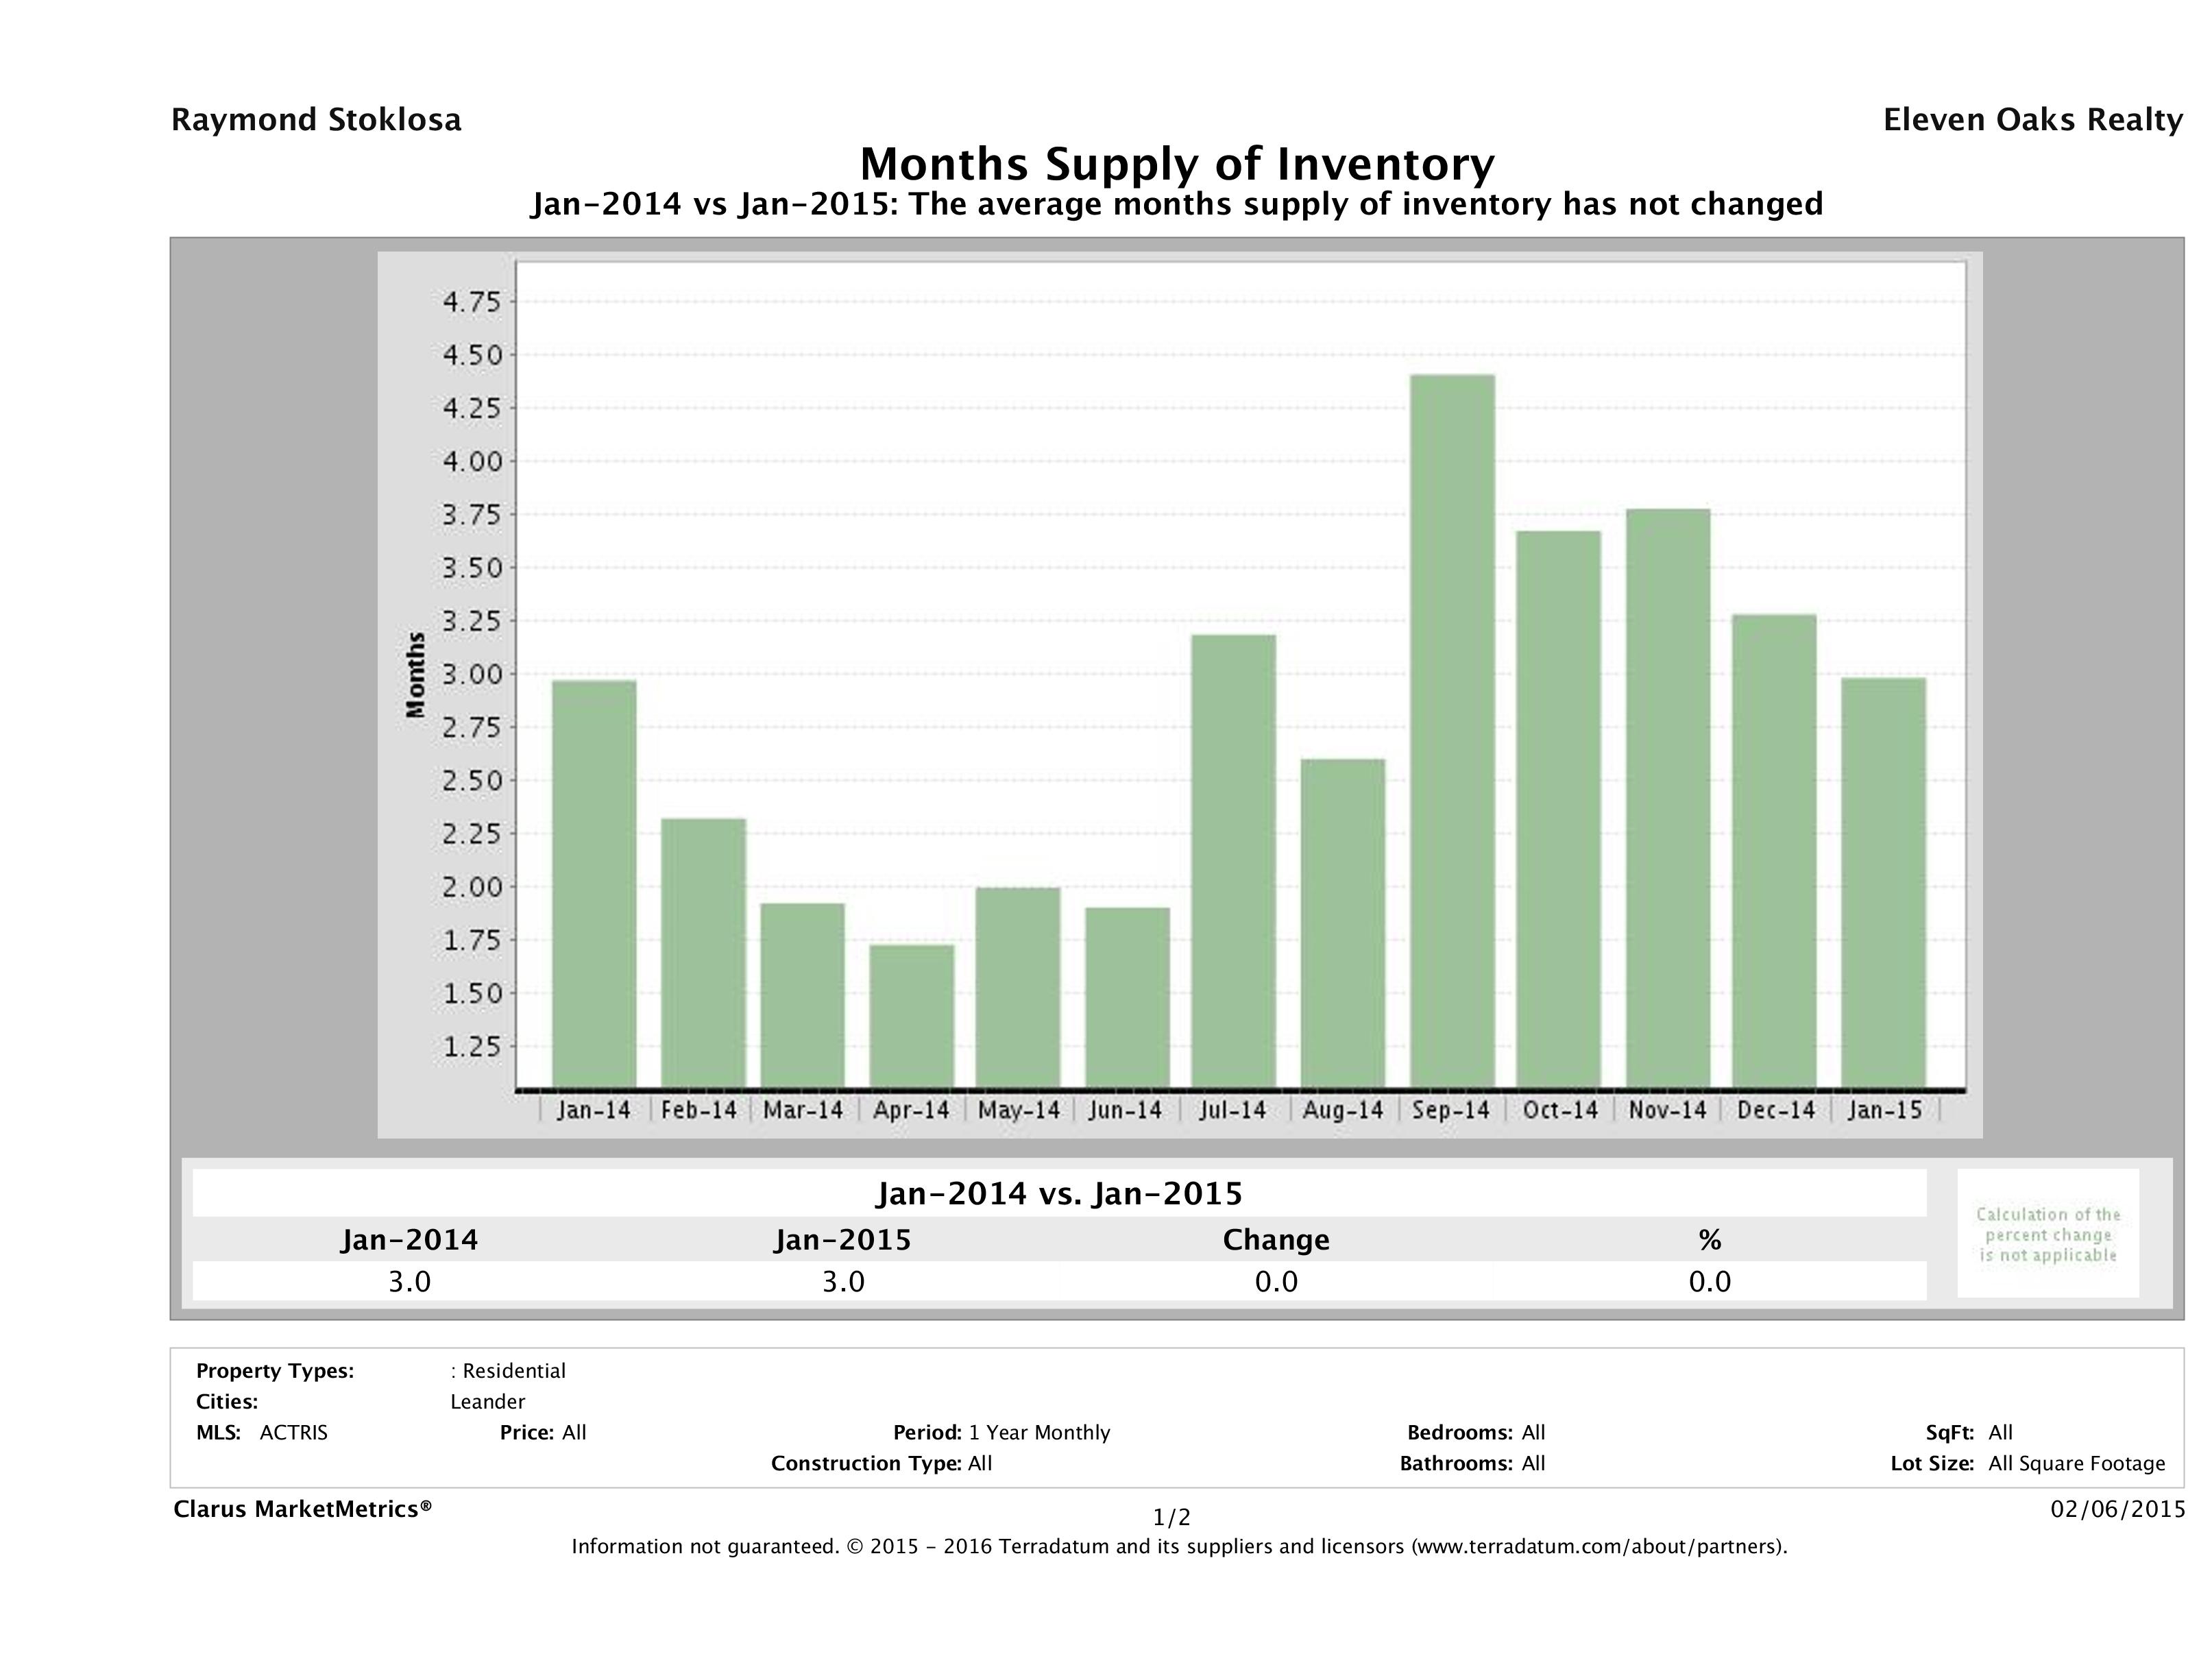 Leander single family home months inventory January 2015